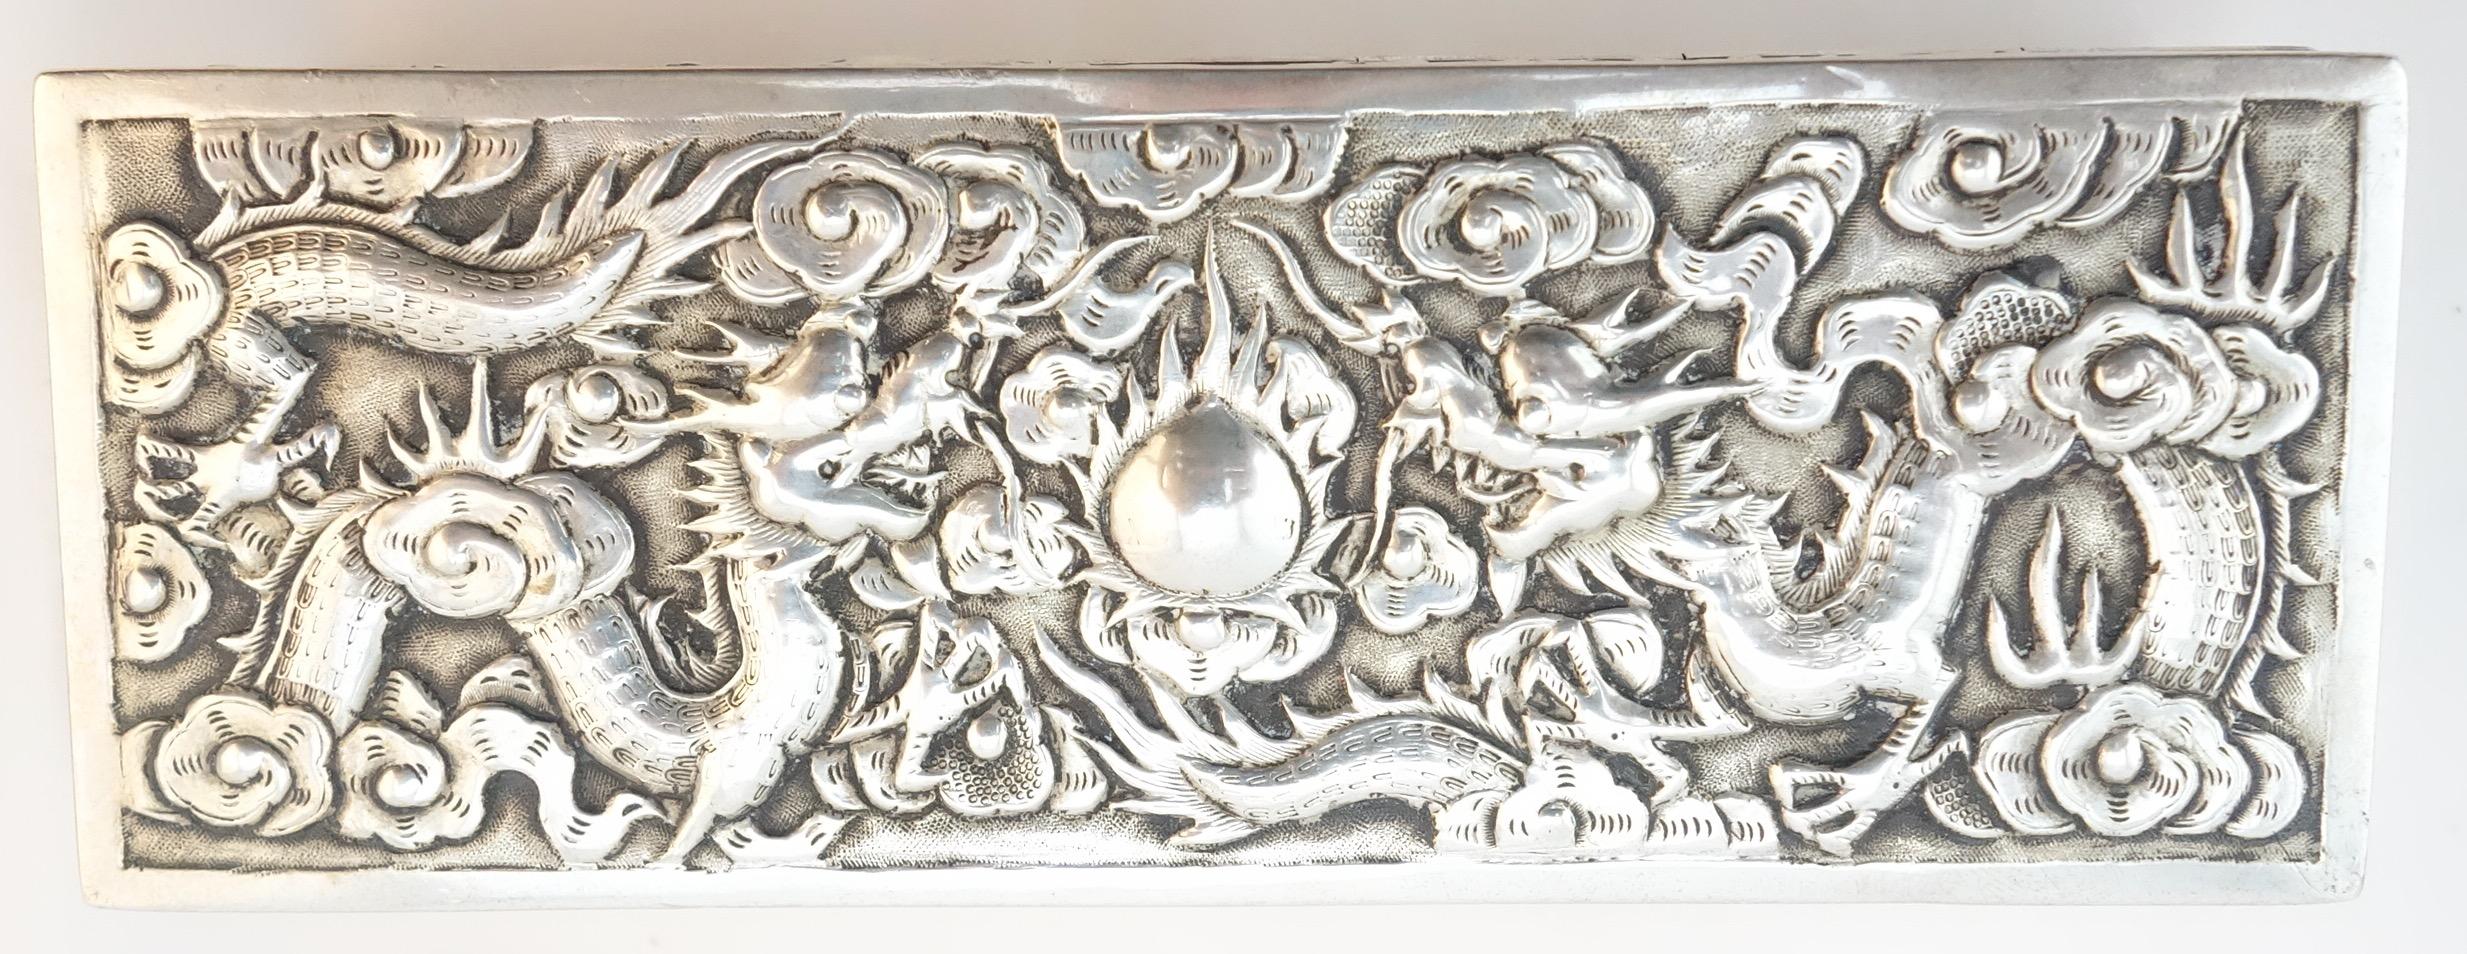 Chinese export silver openwork and repousse box depicting traditional design of dragons and flaming pearl. The box is very finely executed by hand with sharp design elements. It is marked 